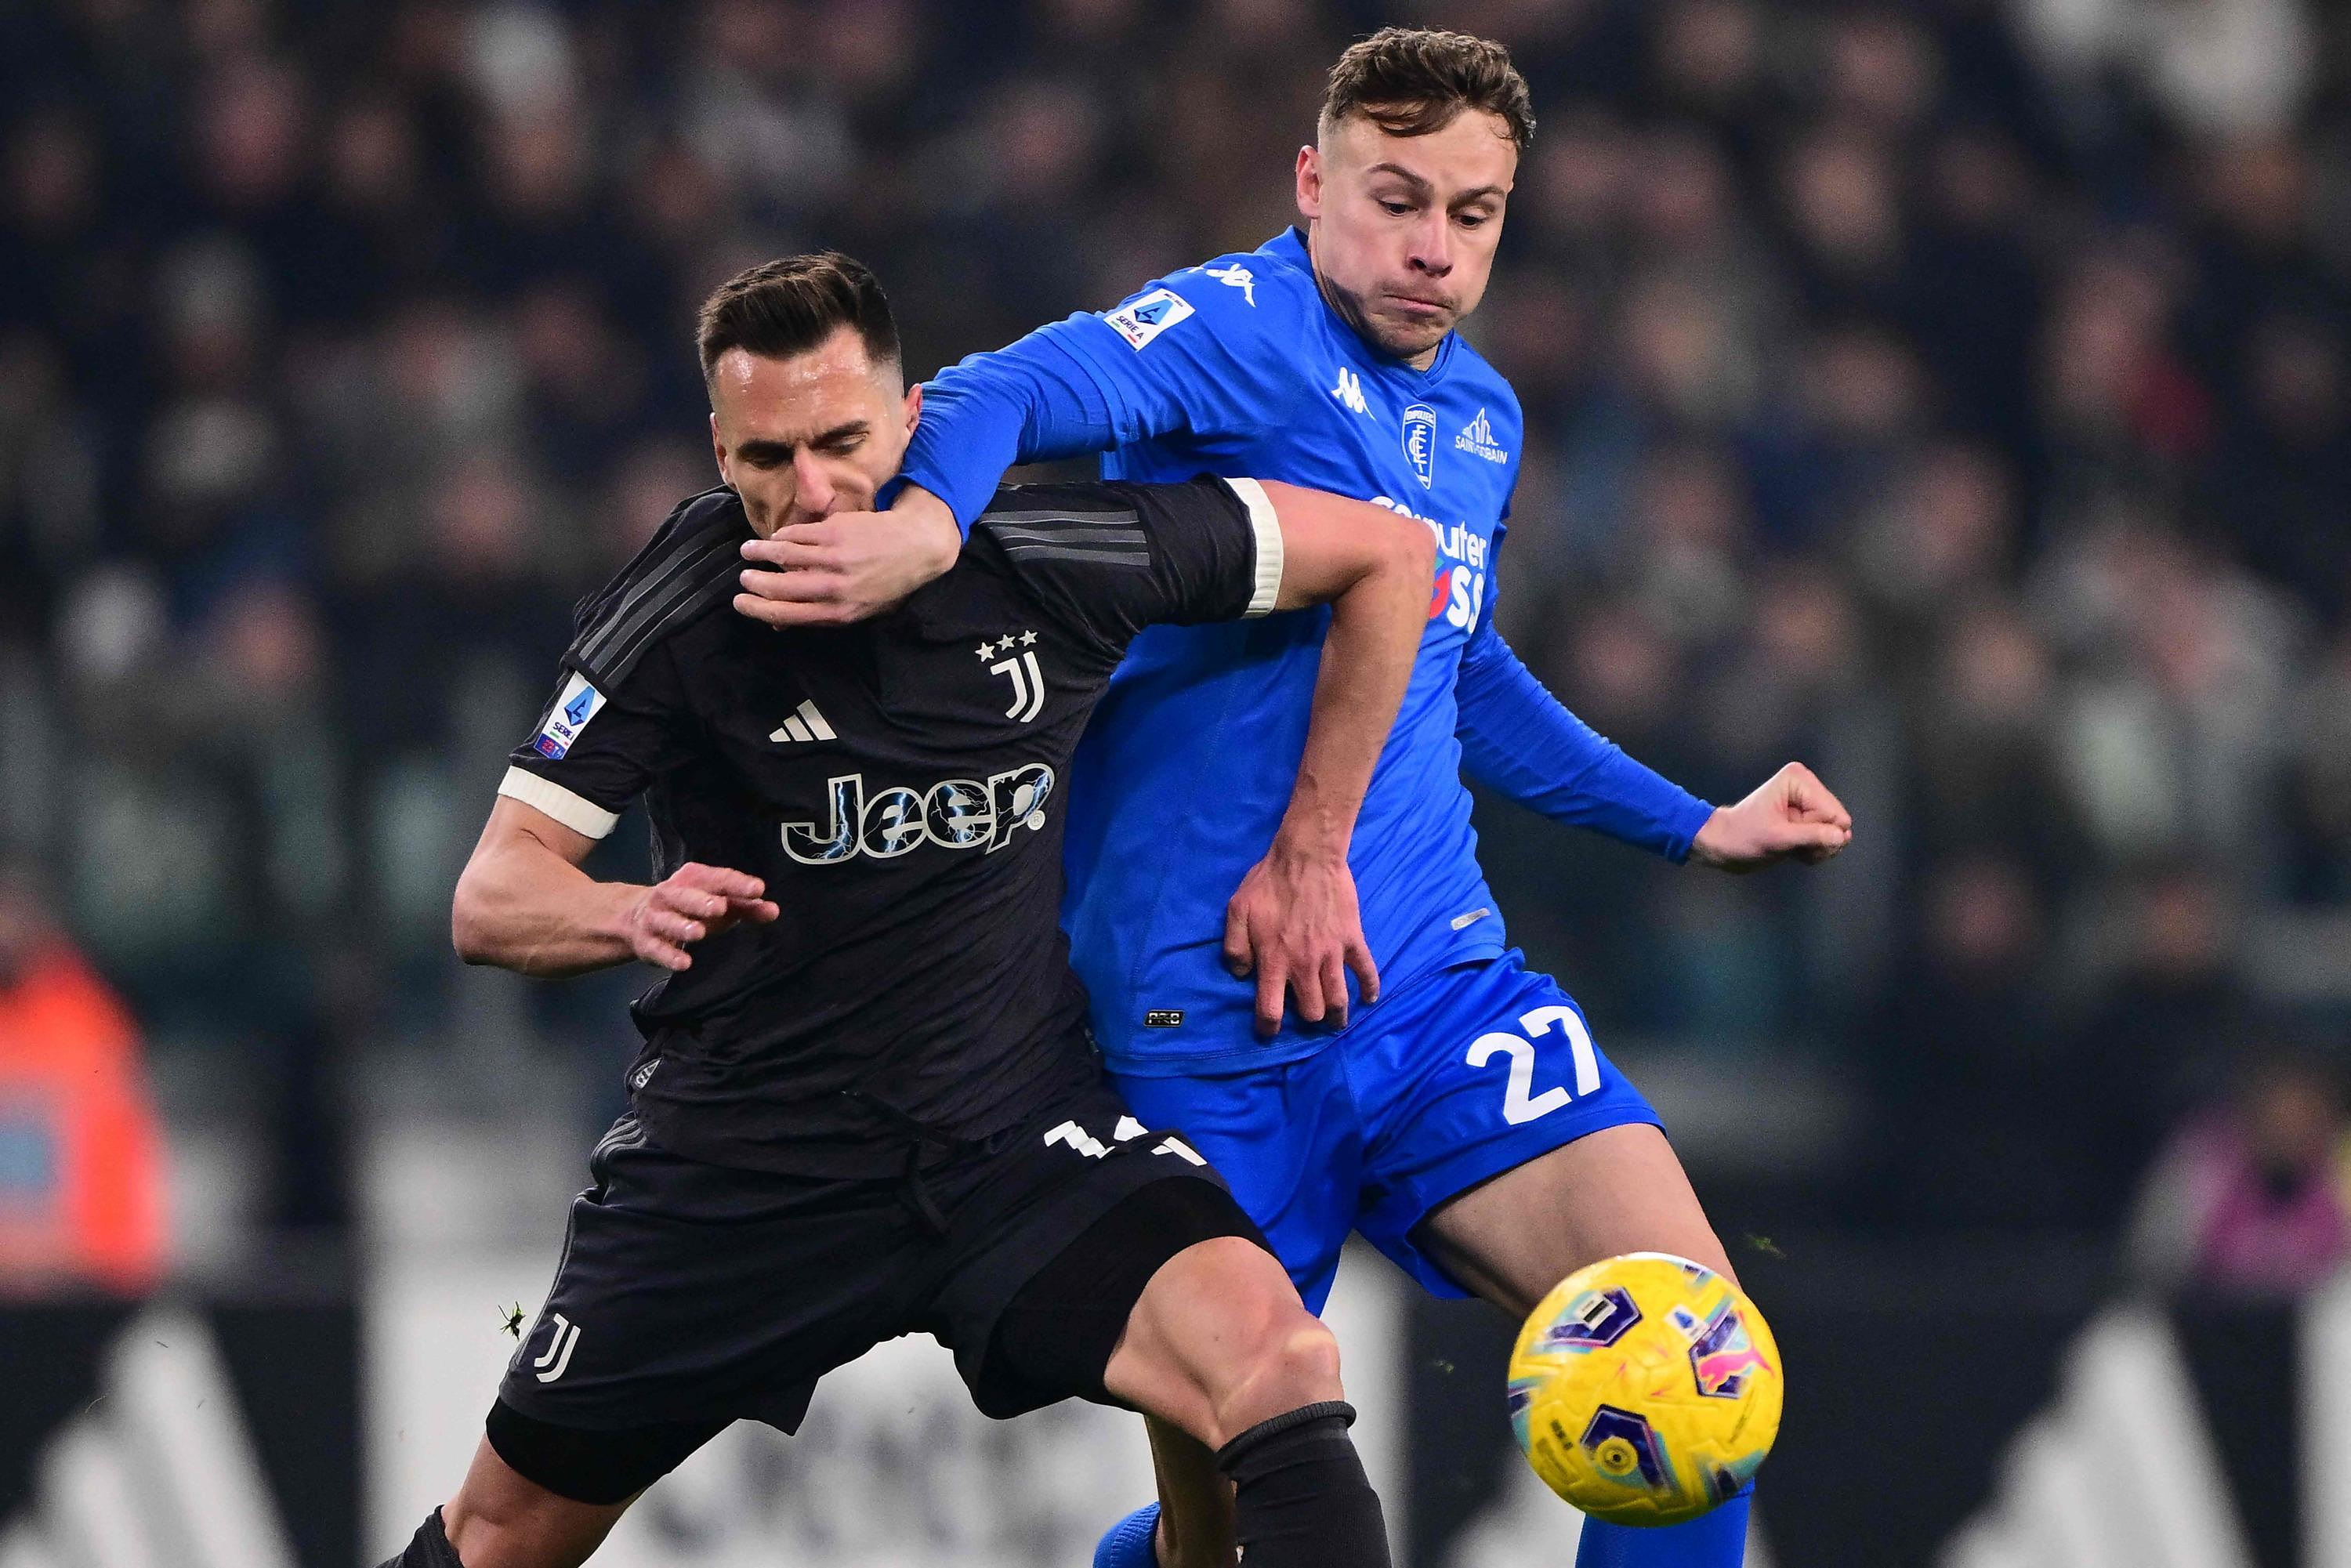 Serie A: Milik sees red, Juve looks gray